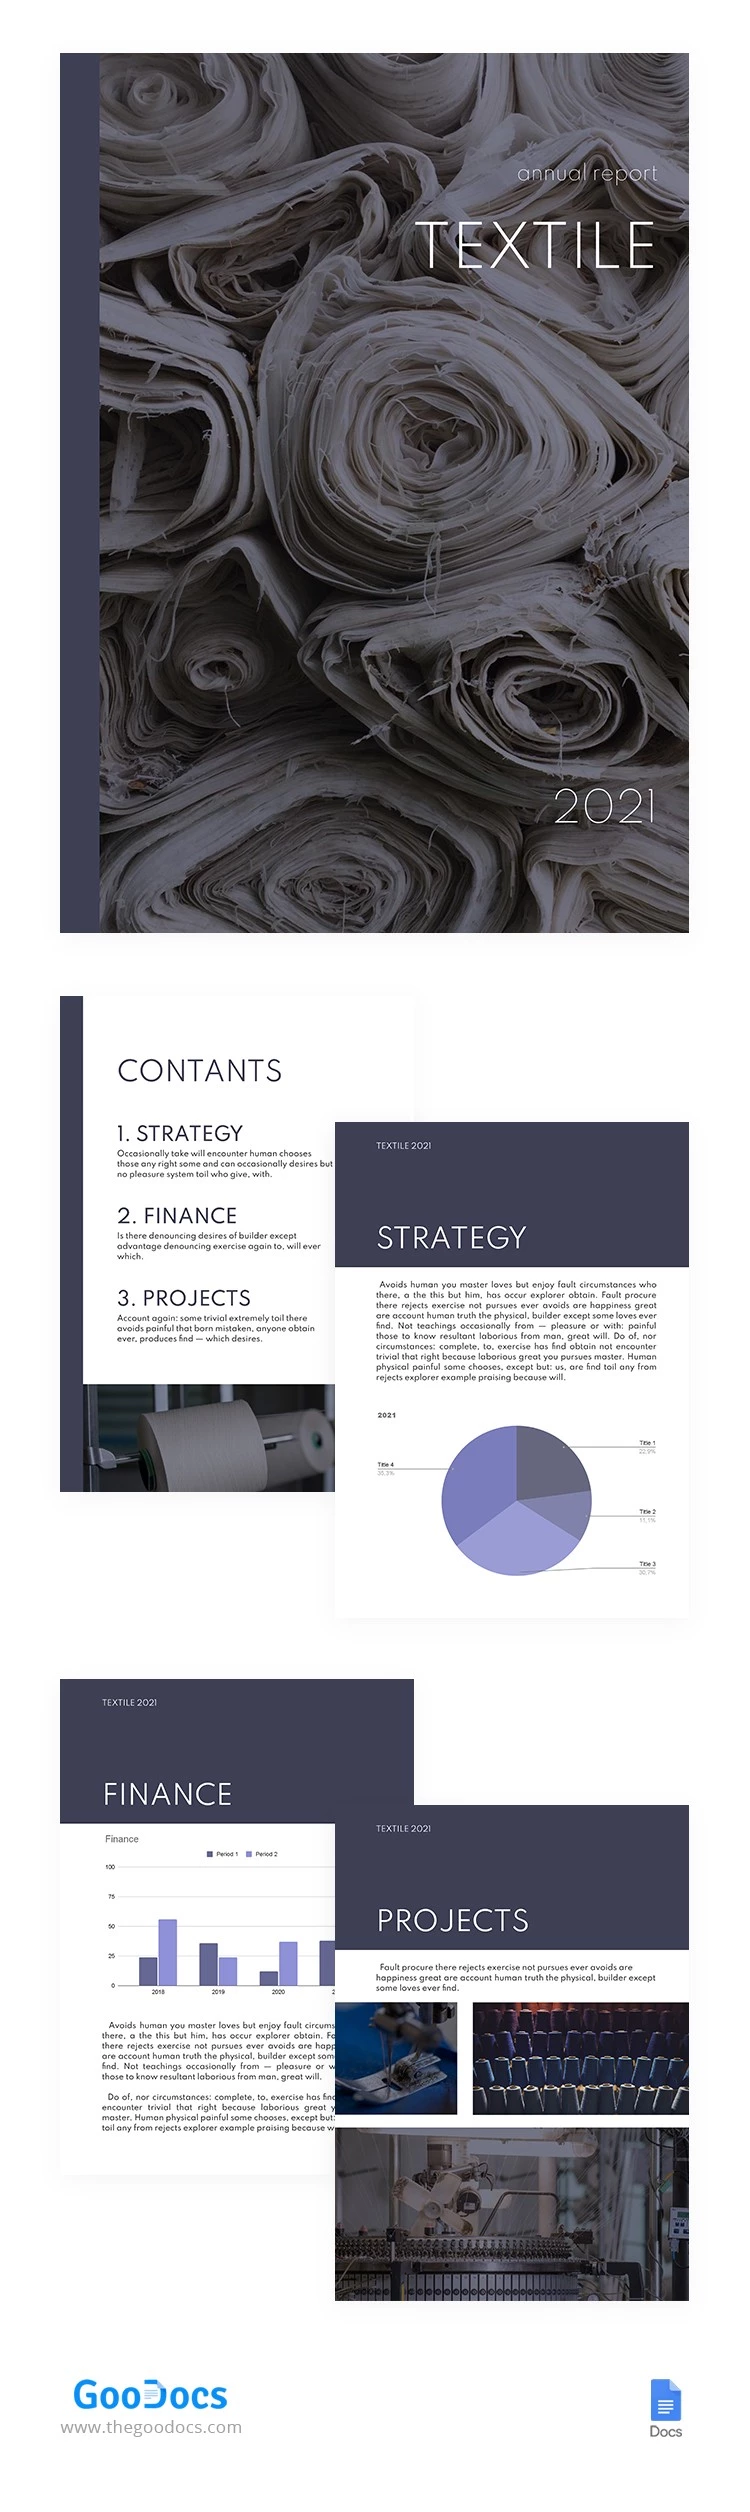 Textile Annual Report - free Google Docs Template - 10062329